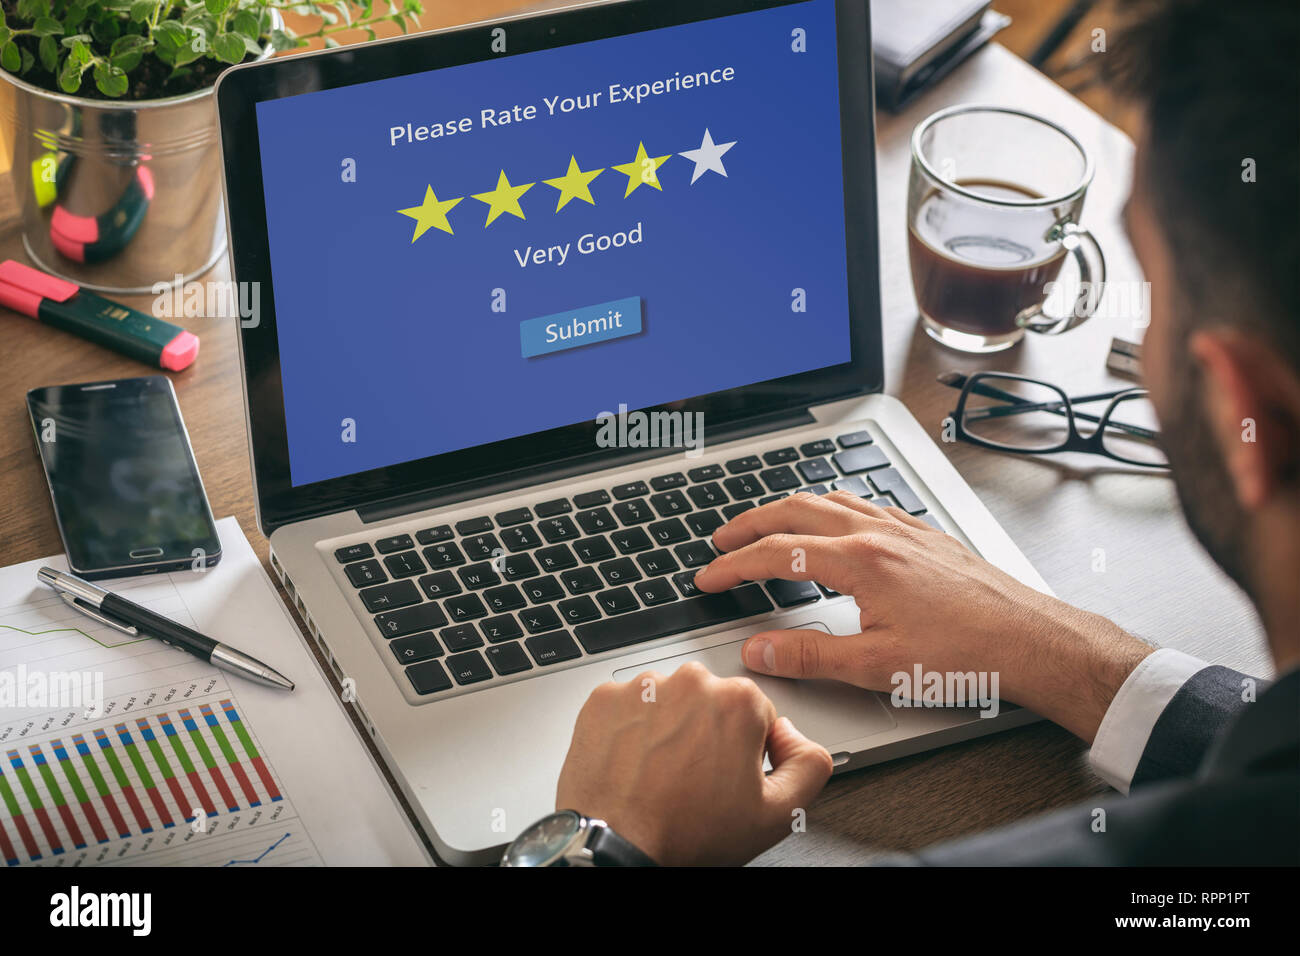 Customers service rating. Man working with a computer, 4 stars, very good text on the screen, office background Stock Photo